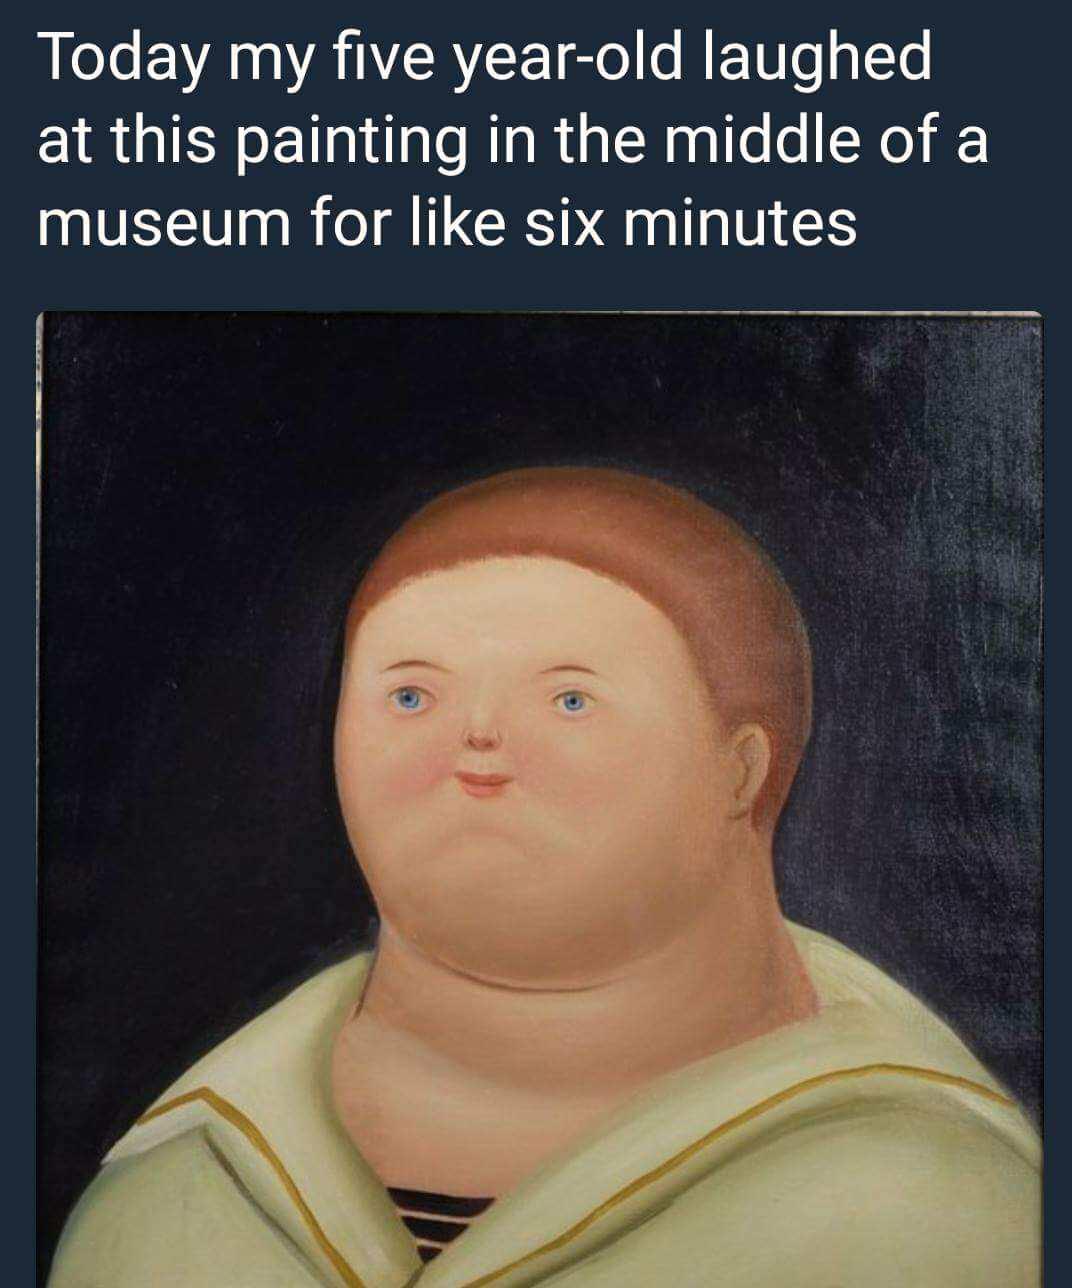 old painting meme - Today my five yearold laughed at this painting in the middle of a museum for six minutes